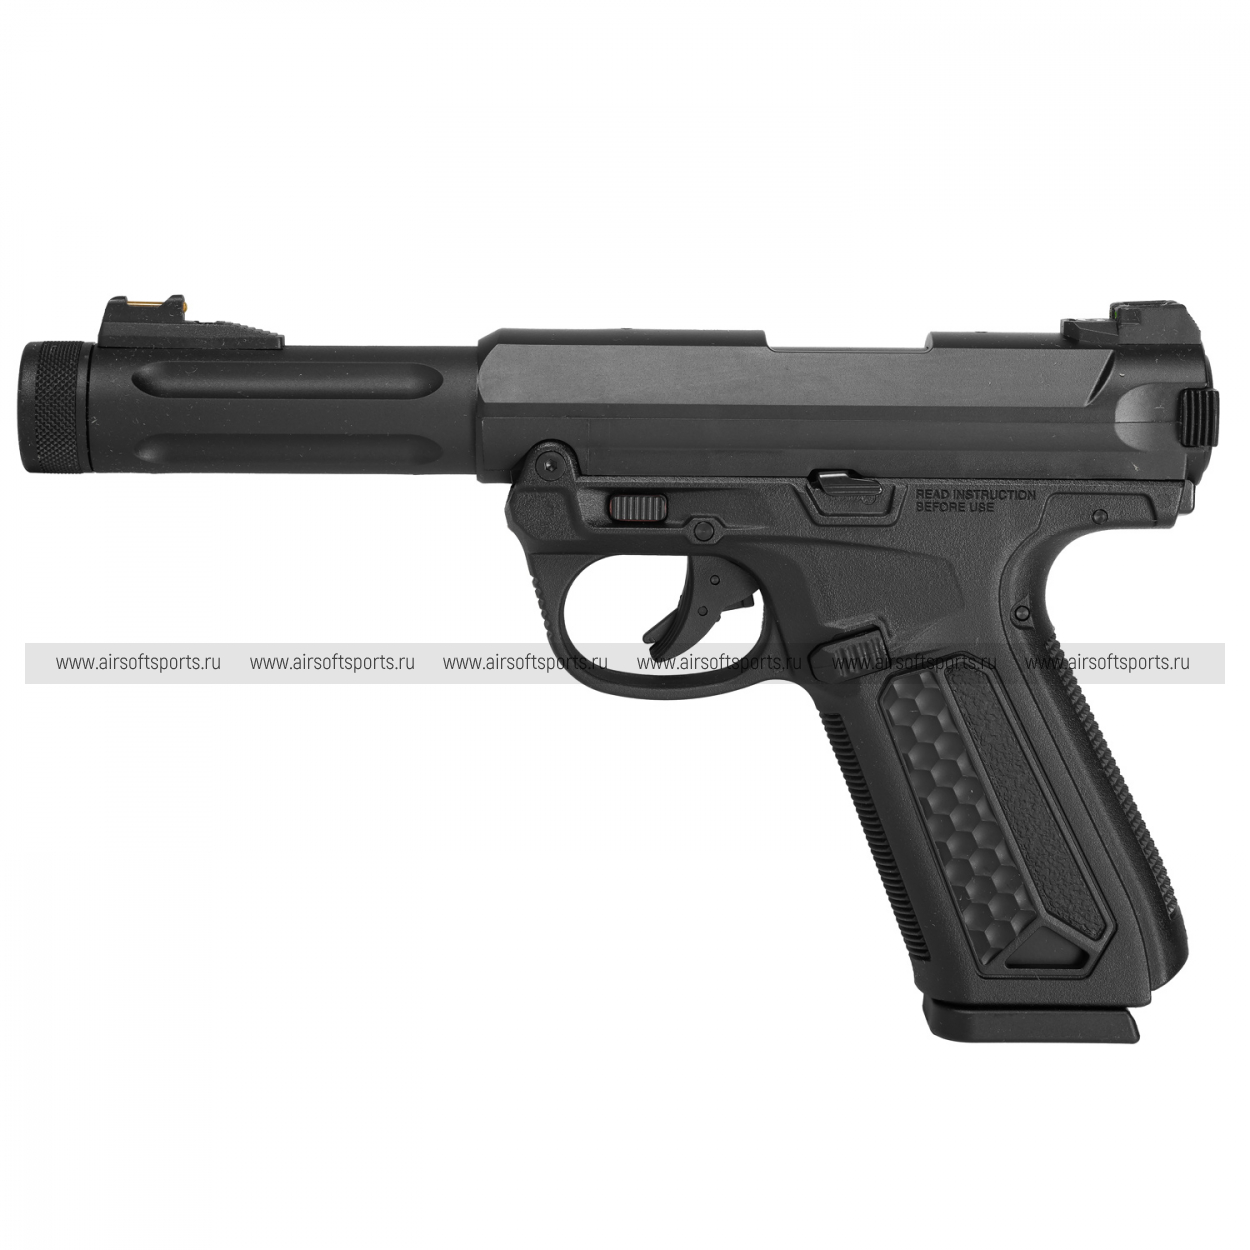 Action Army AAP-01 Assassin GBB Pistol